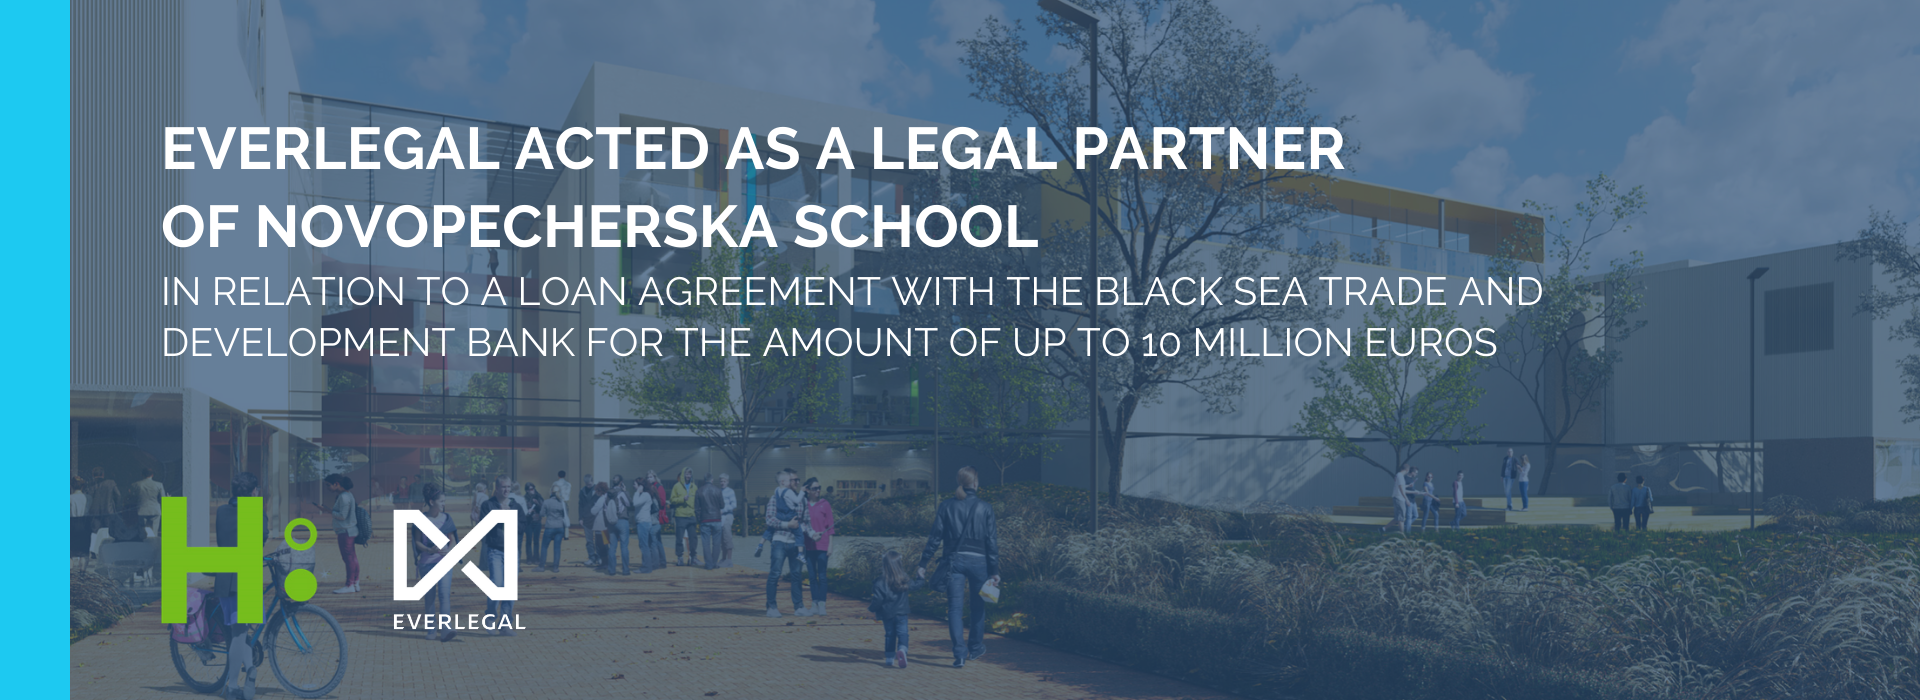 EVERLEGAL Acted as a Legal Partner of Novopecherska School in Eelation to a Loan Agreement with the Black Sea Trade and Development Bank (BSTDB) for the Amount of Up to 10 Million Euros for the Construction of a School in UNIT.City Innovation Park